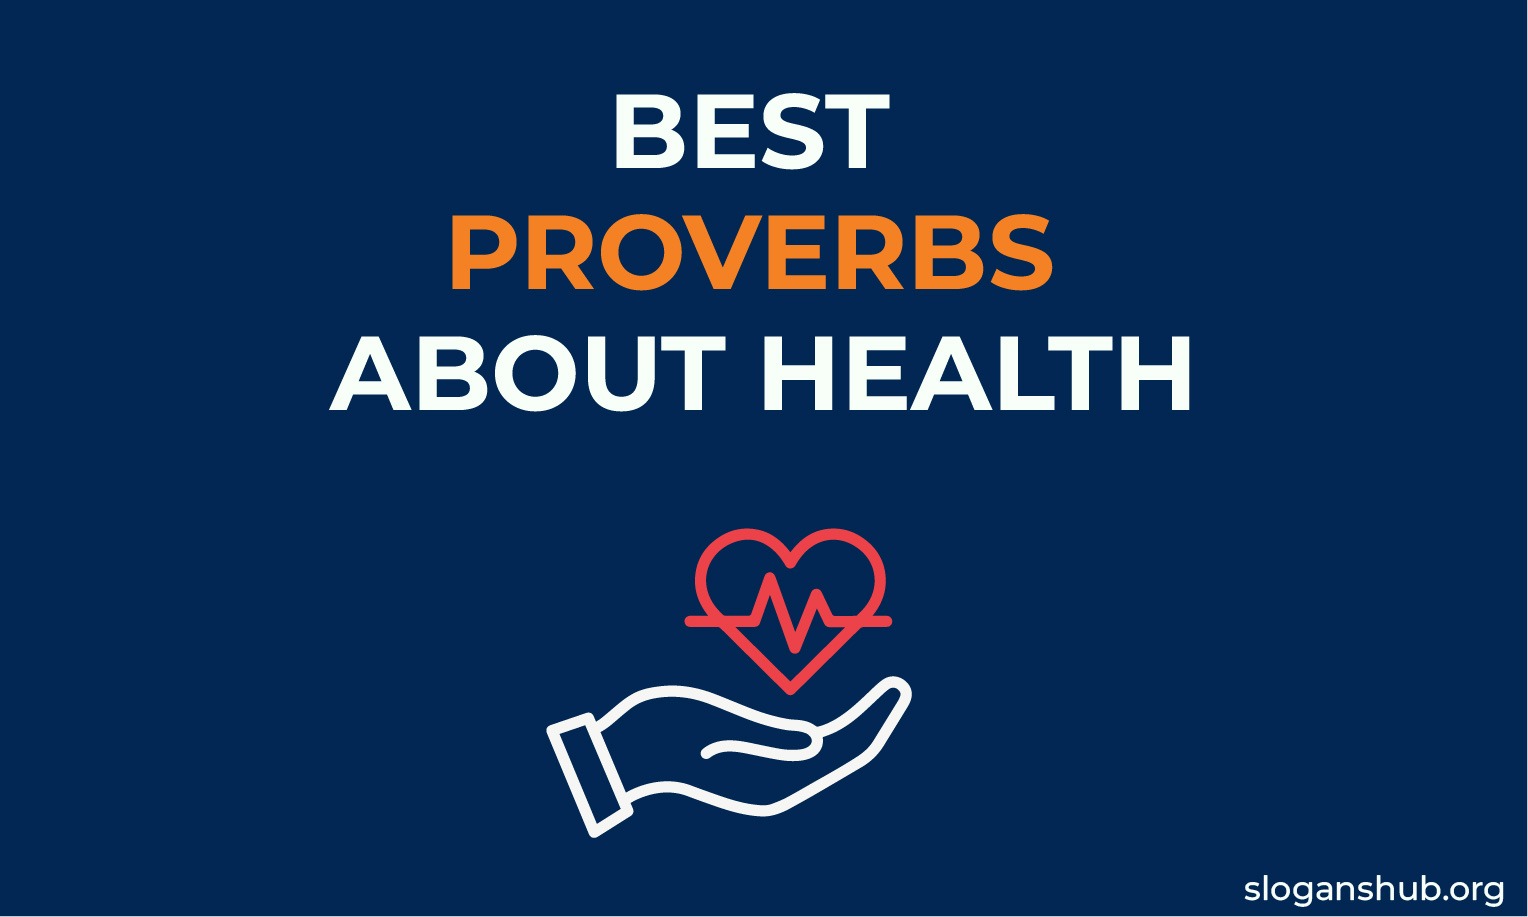 65 Best Proverbs About Health